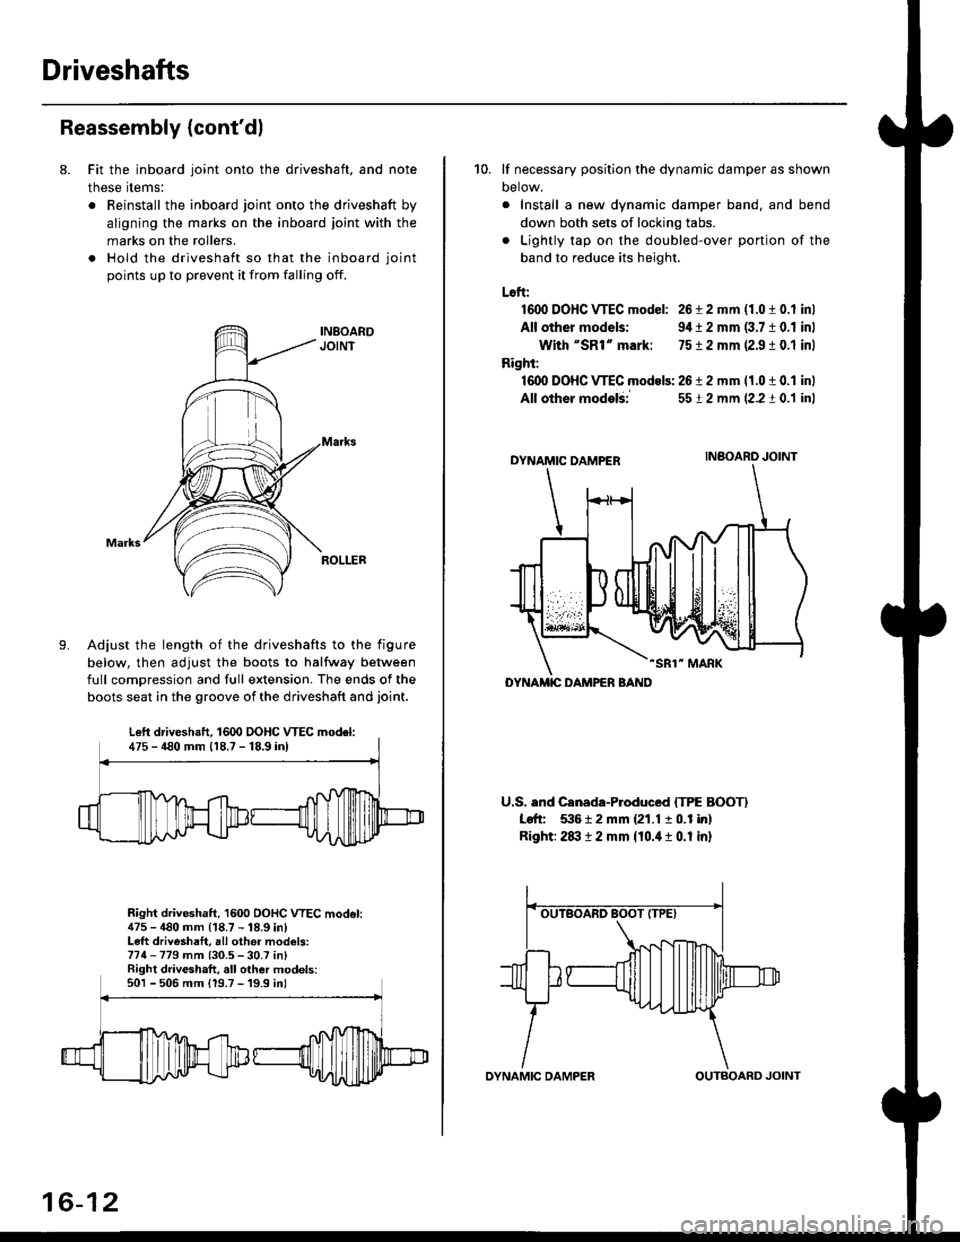 HONDA CIVIC 1999 6.G Service Manual Driveshafts
Reassembly (contdl
8. Fit the inboard joint onto the driveshaft, and note
these items:
. Reinstall the inboard joint onto the driveshaft by
aligning the marks on the inboard joint with th